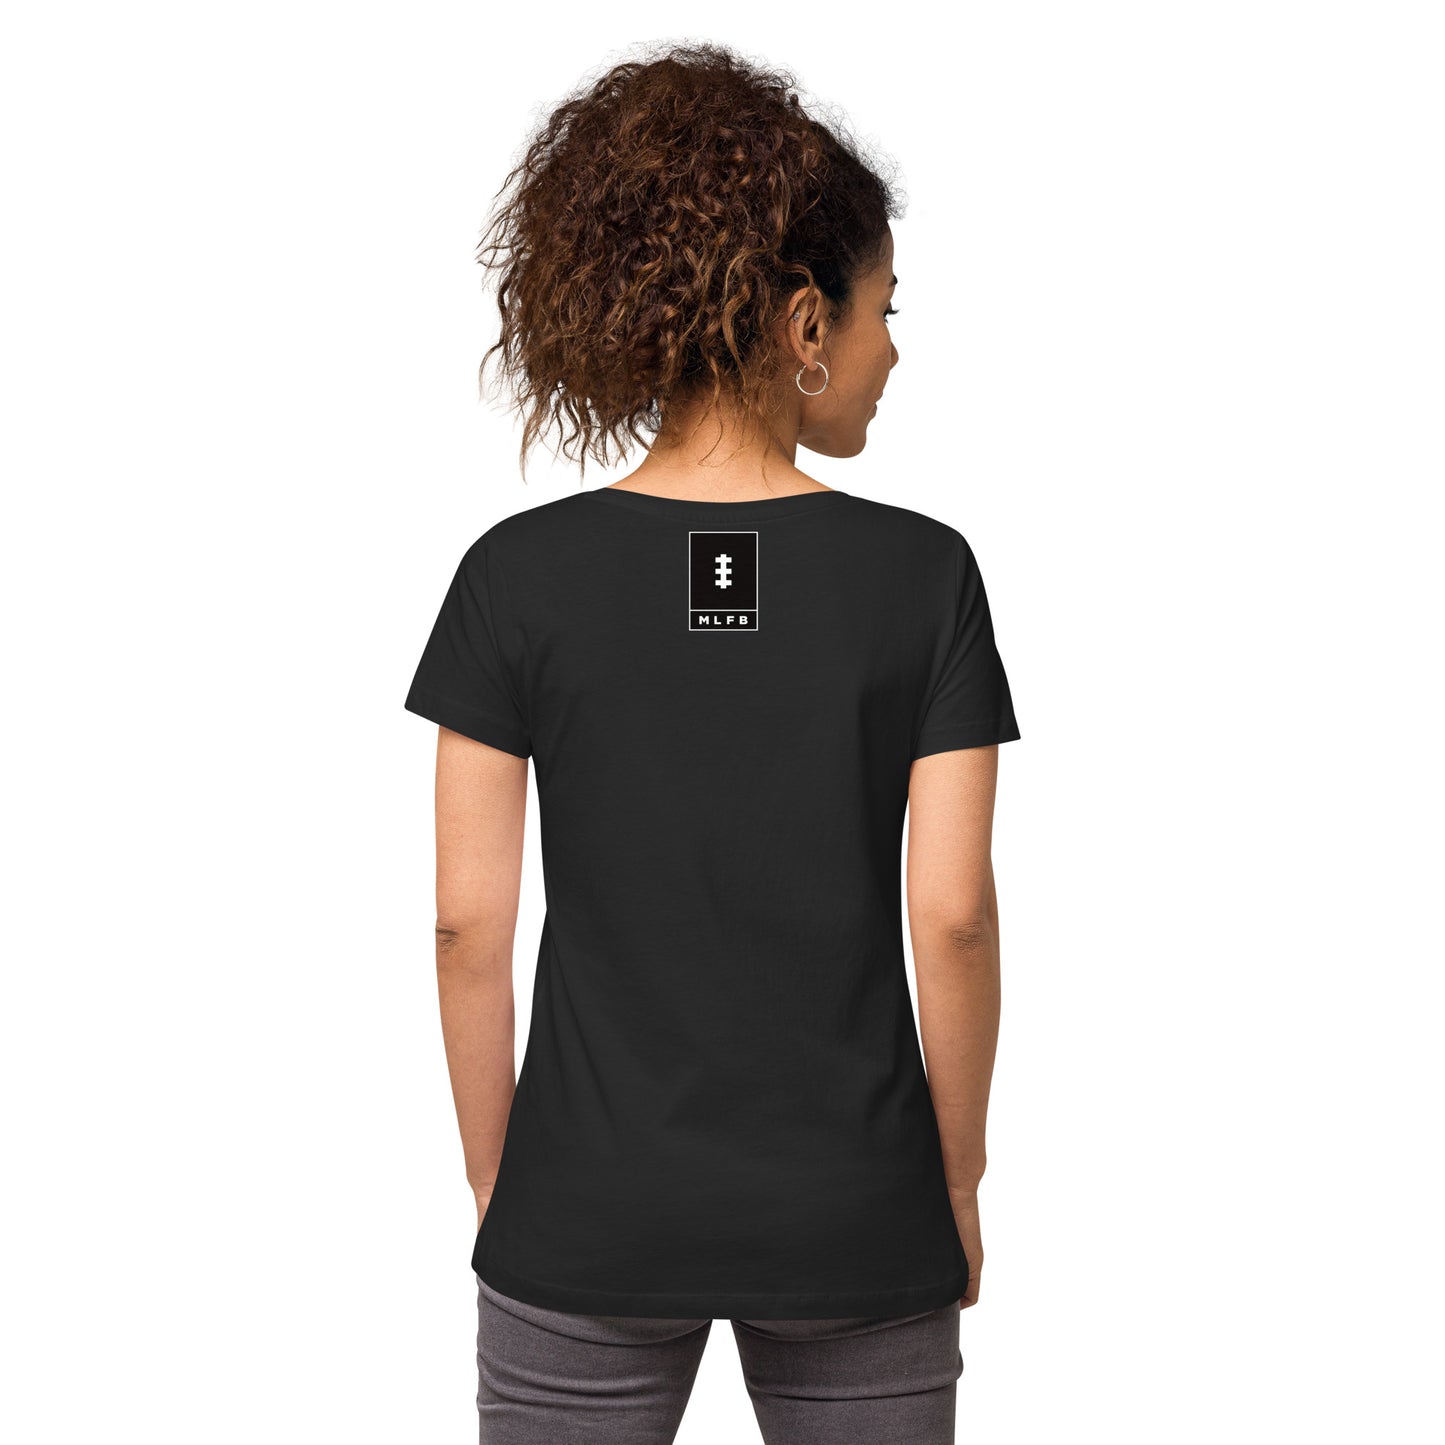 Women’s Patience Is Strength fitted v-neck t-shirt